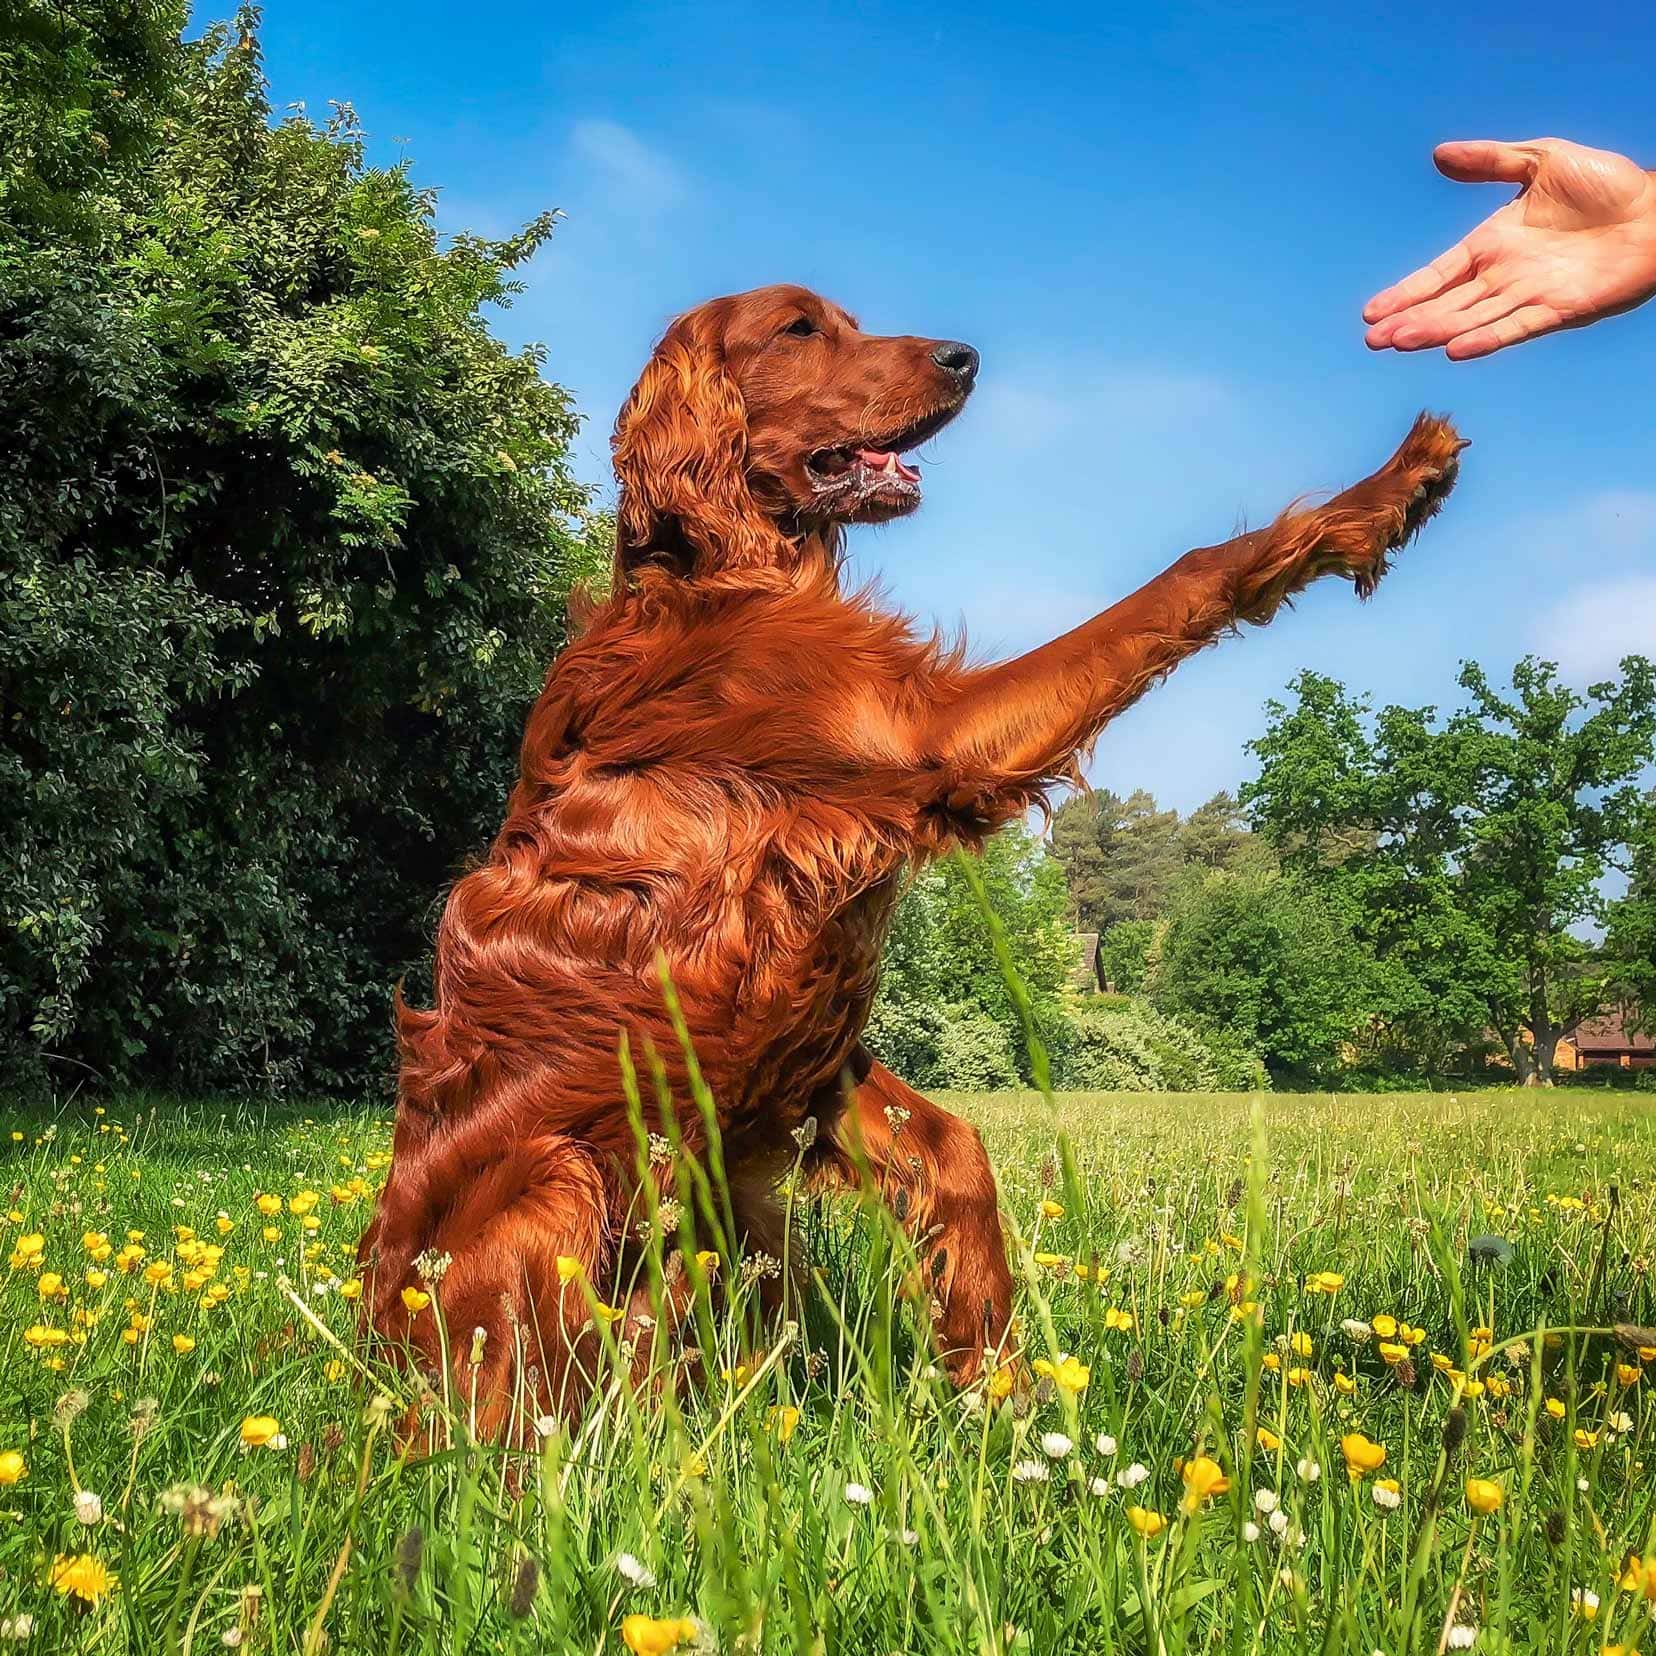 Rusty dog with paw up towards lars in a filed of grass